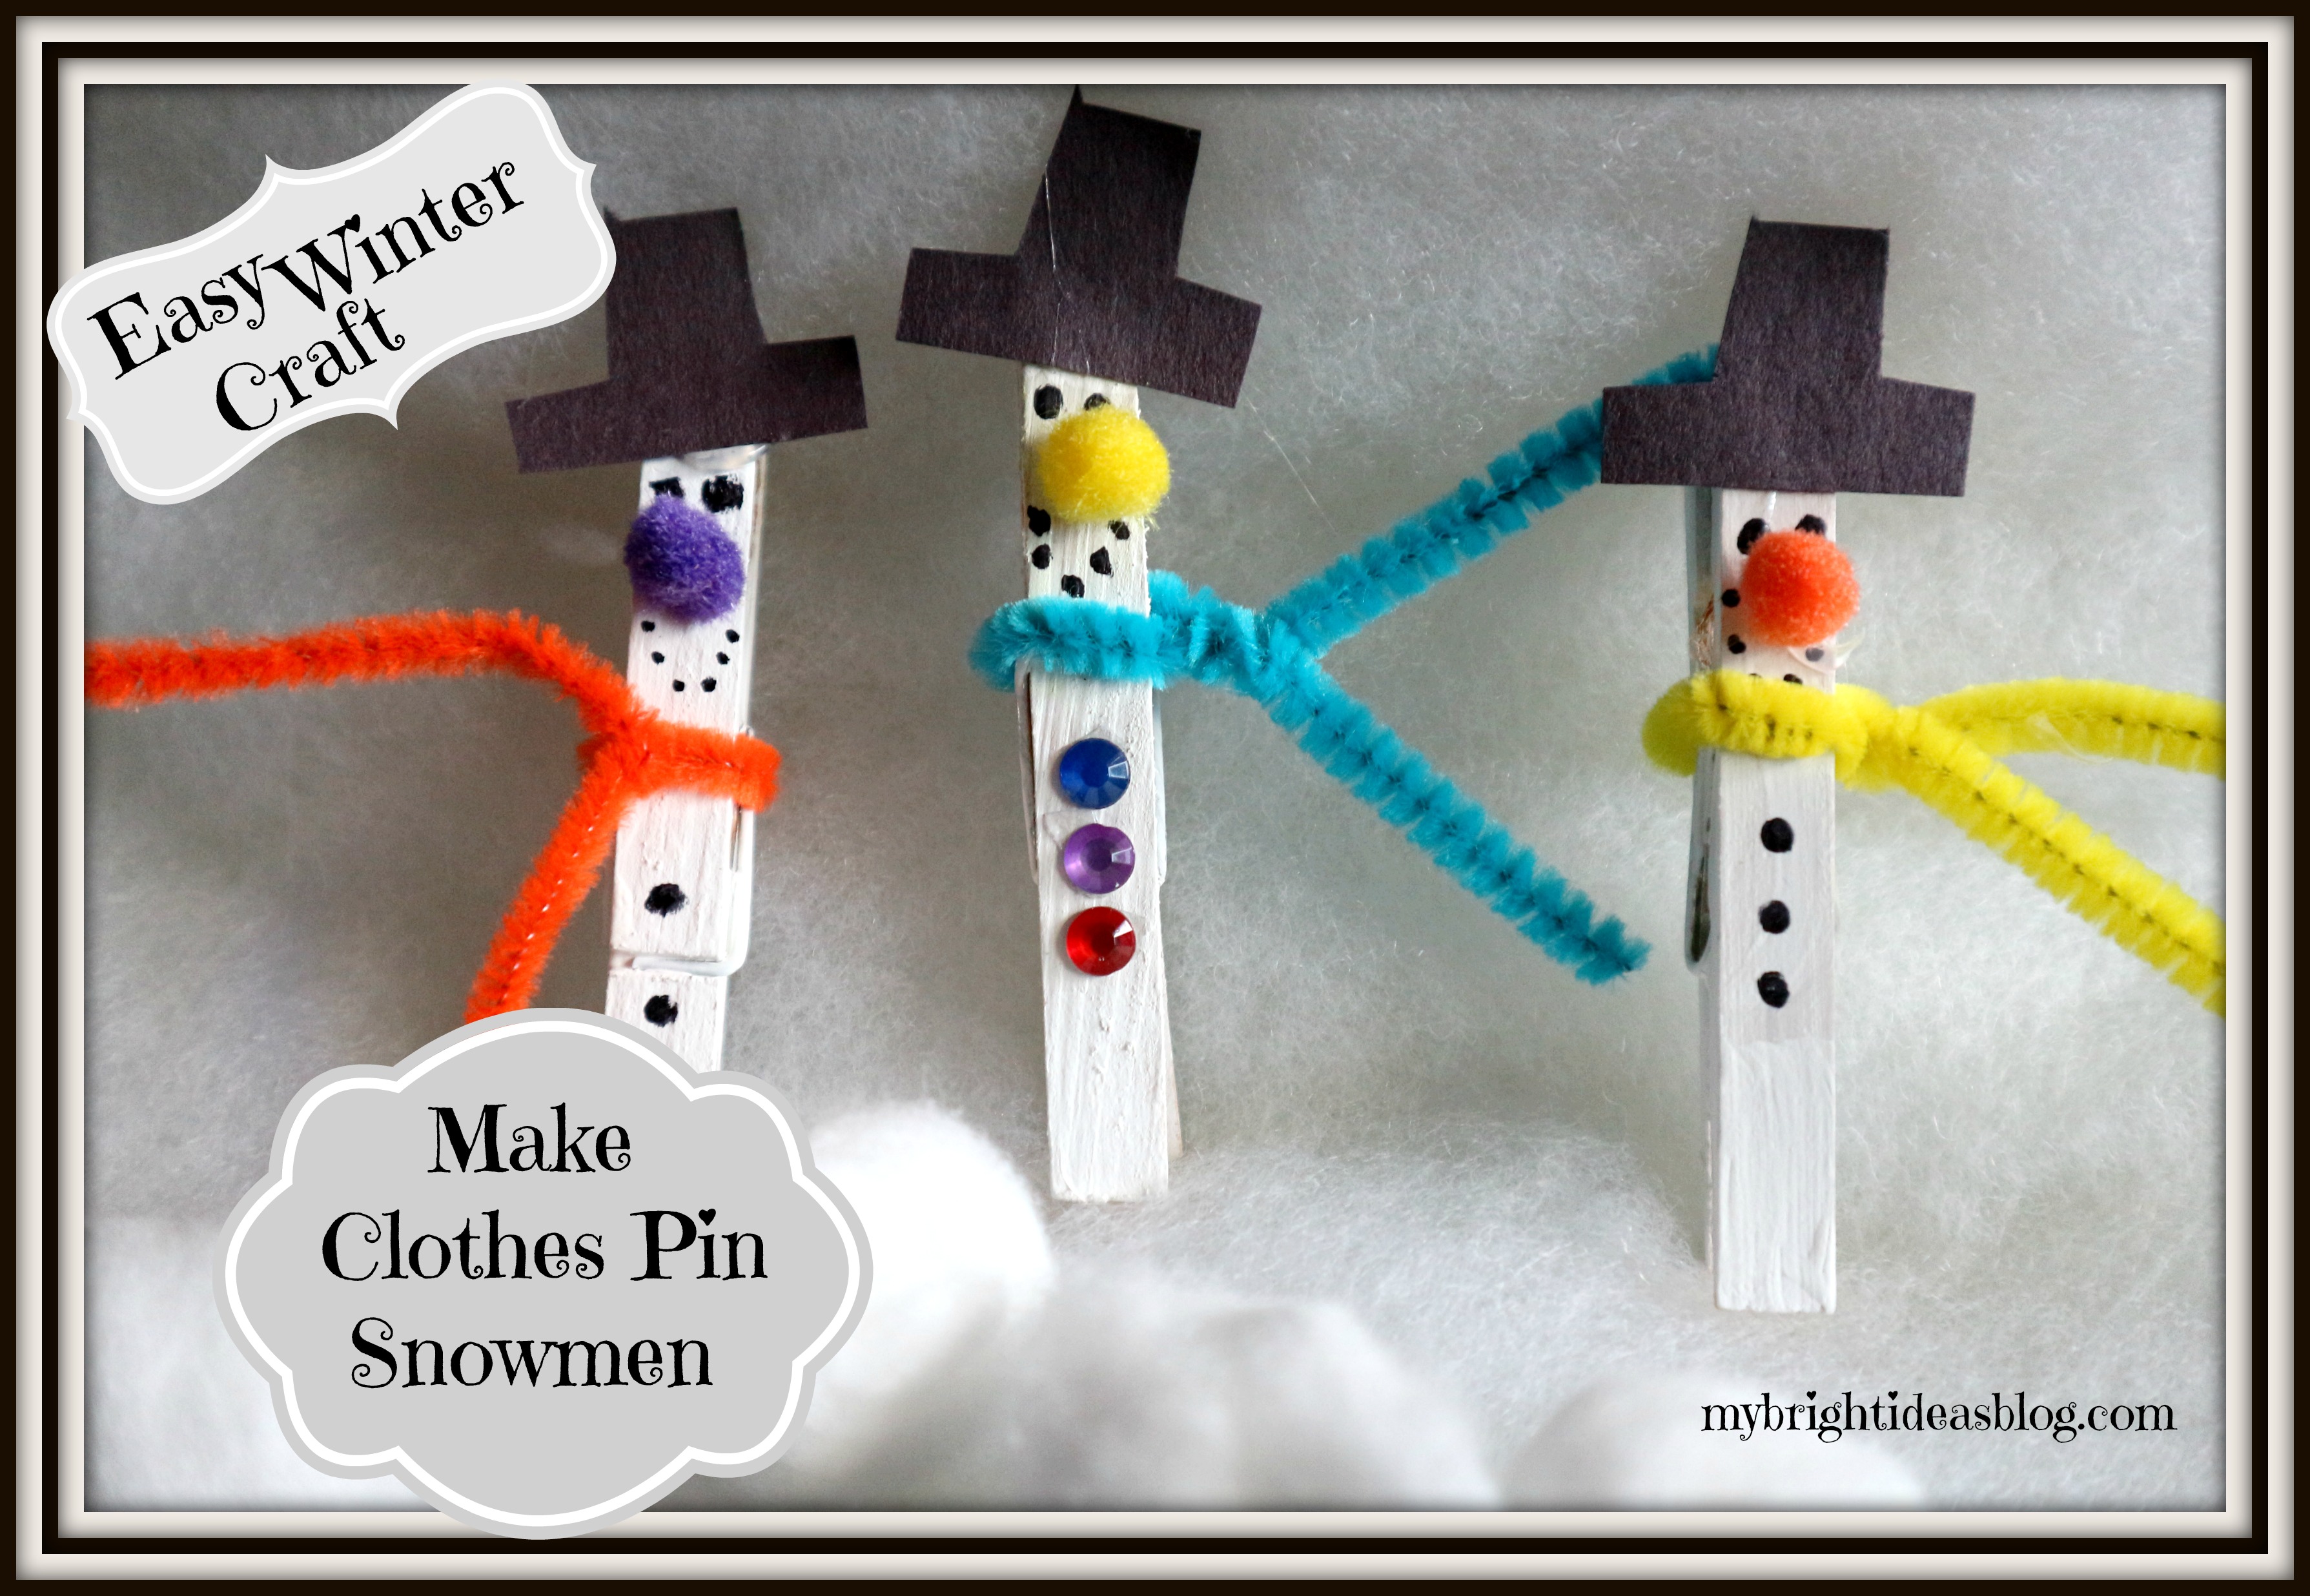 A fun and Easy Winter Craft Project is Clothes Pin Snowmen! mybrightideasblog.com